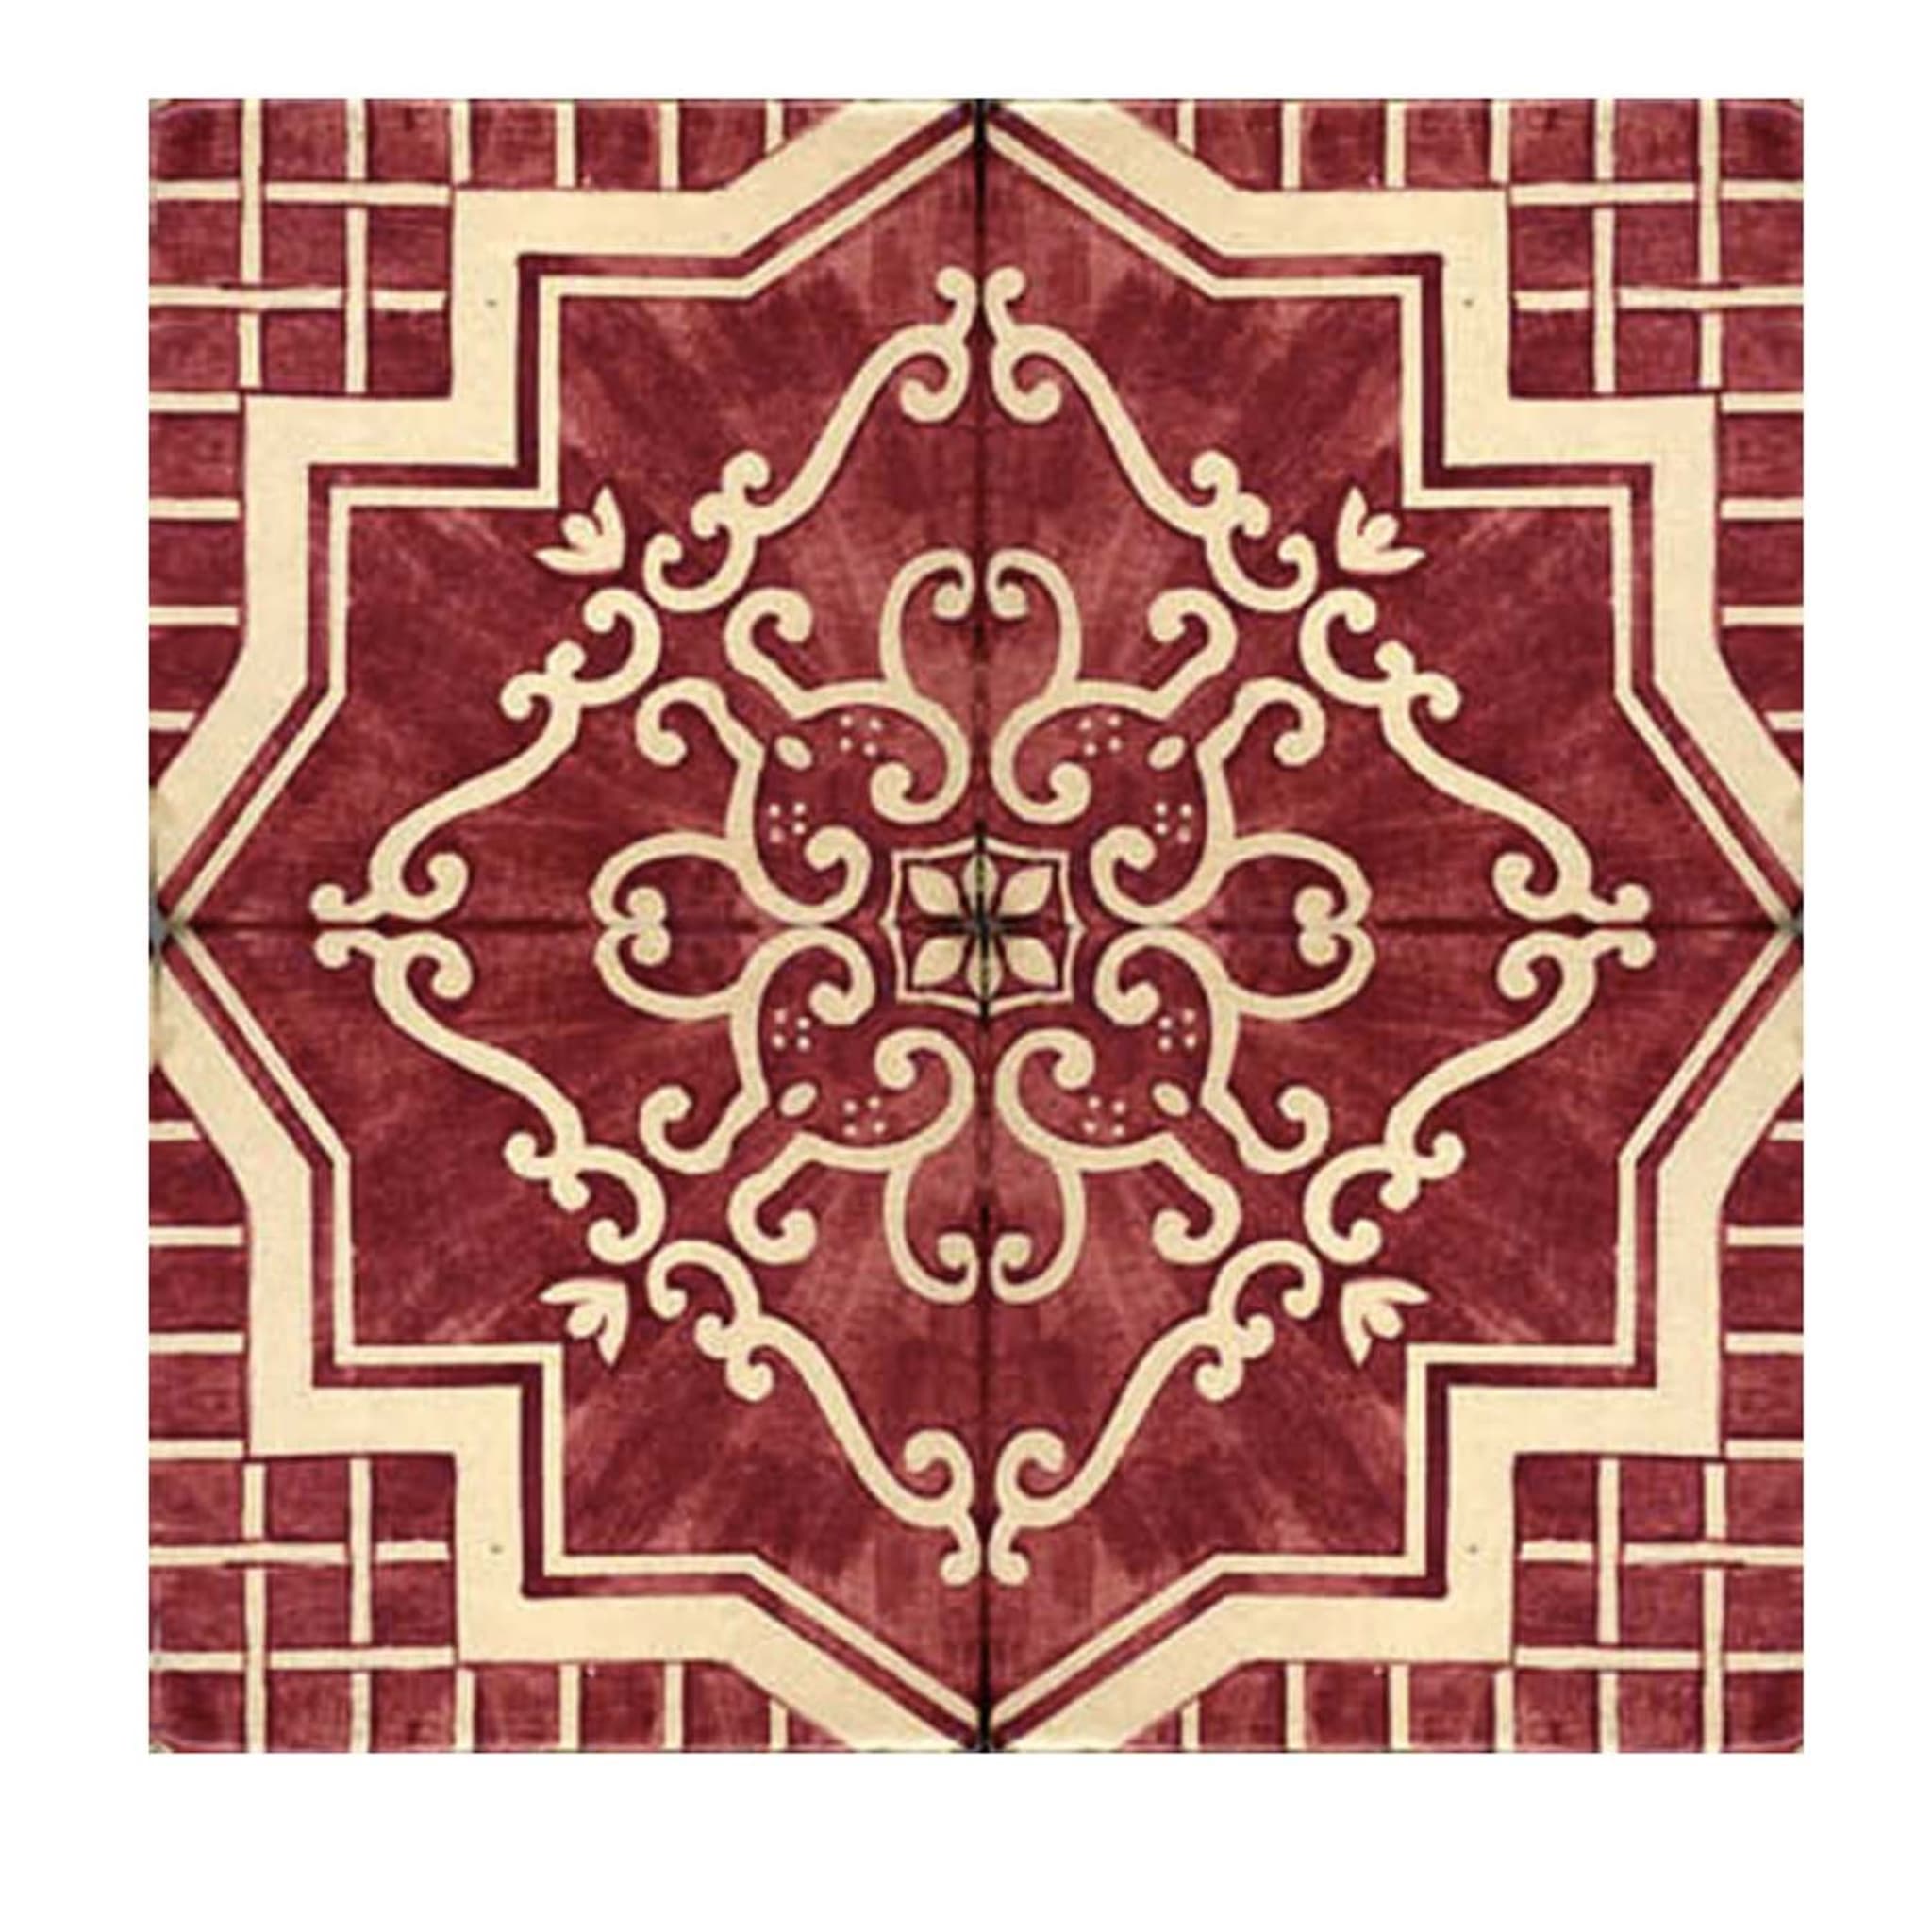 Rosso Ficus Indica Set of 4 Tiles #3 - Main view